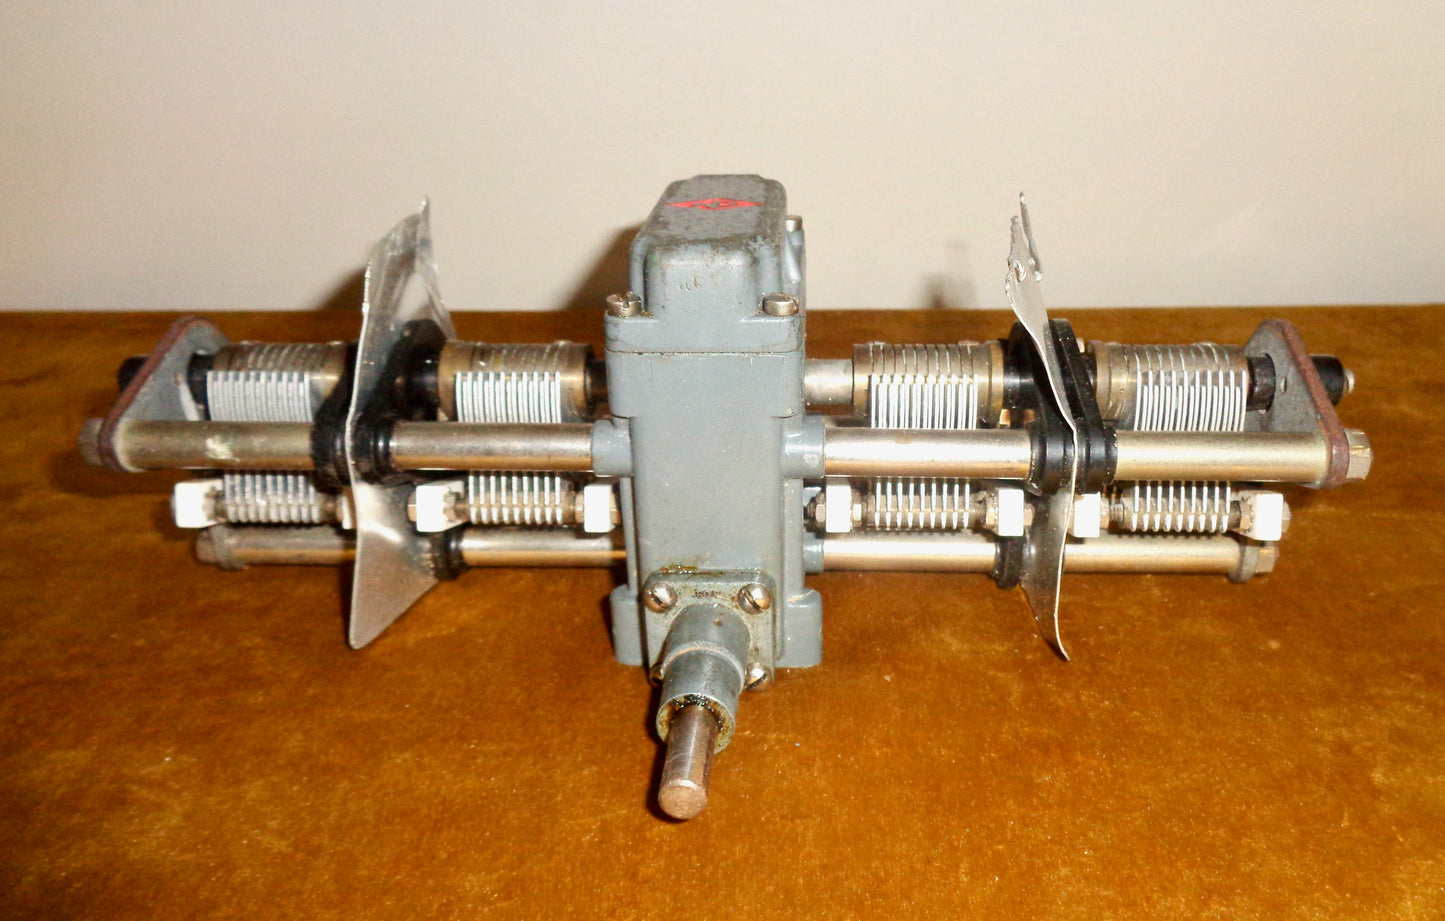 National Precision Condenser PW-4, HRO, 4-section Tuning Gang, Gearbox